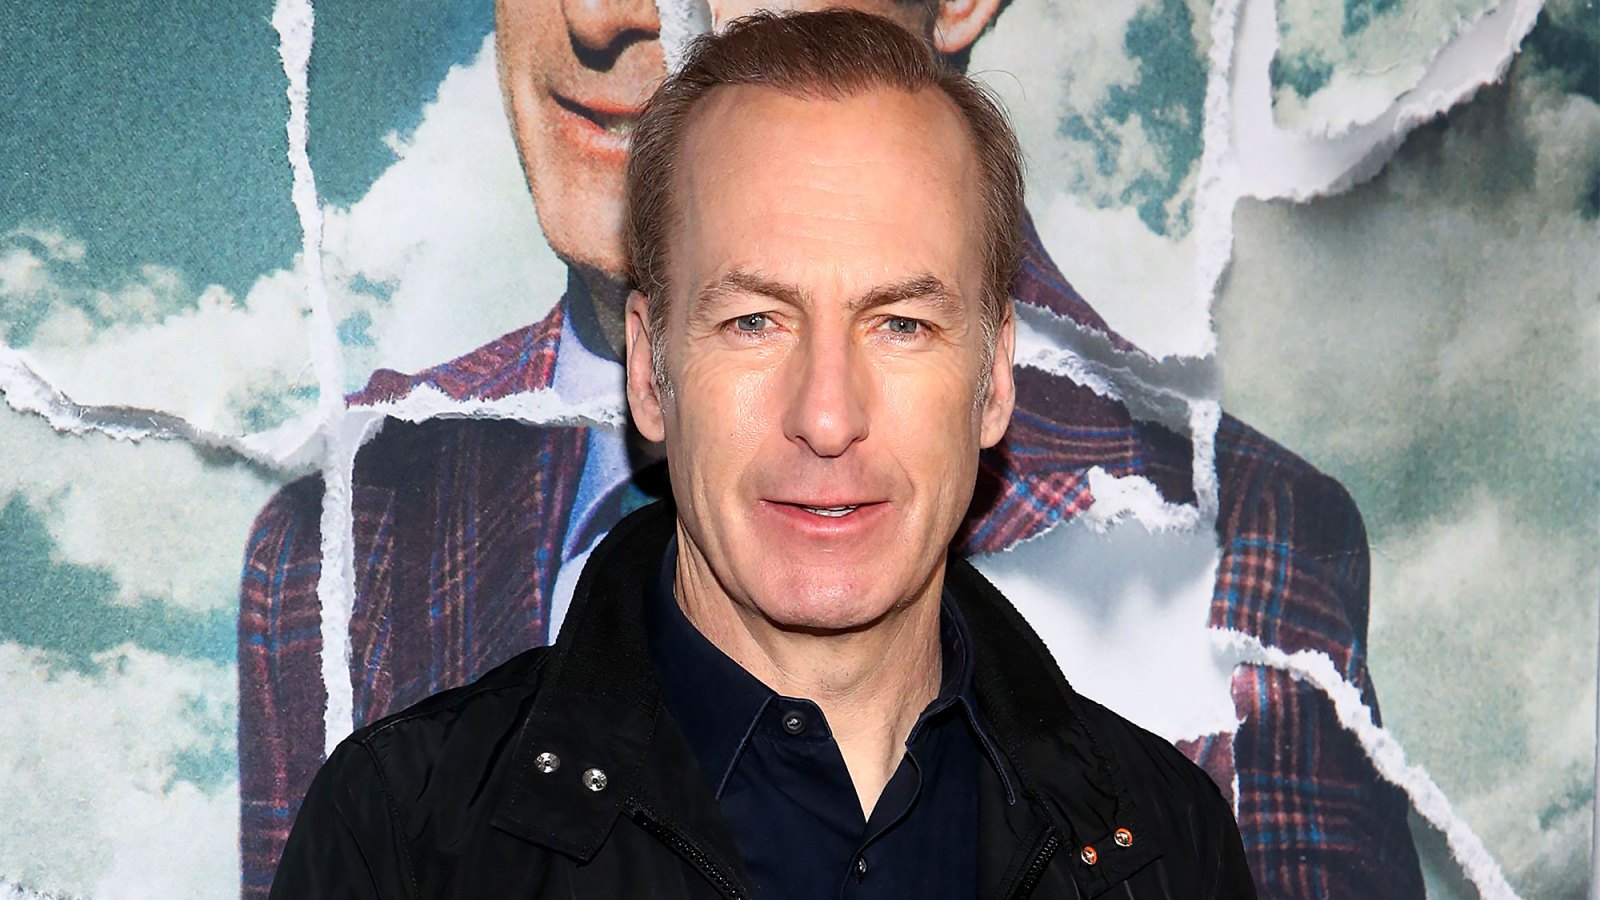 Bob Odenkirk Is ‘Doing Great’ After Recovering From Small Heart Attack